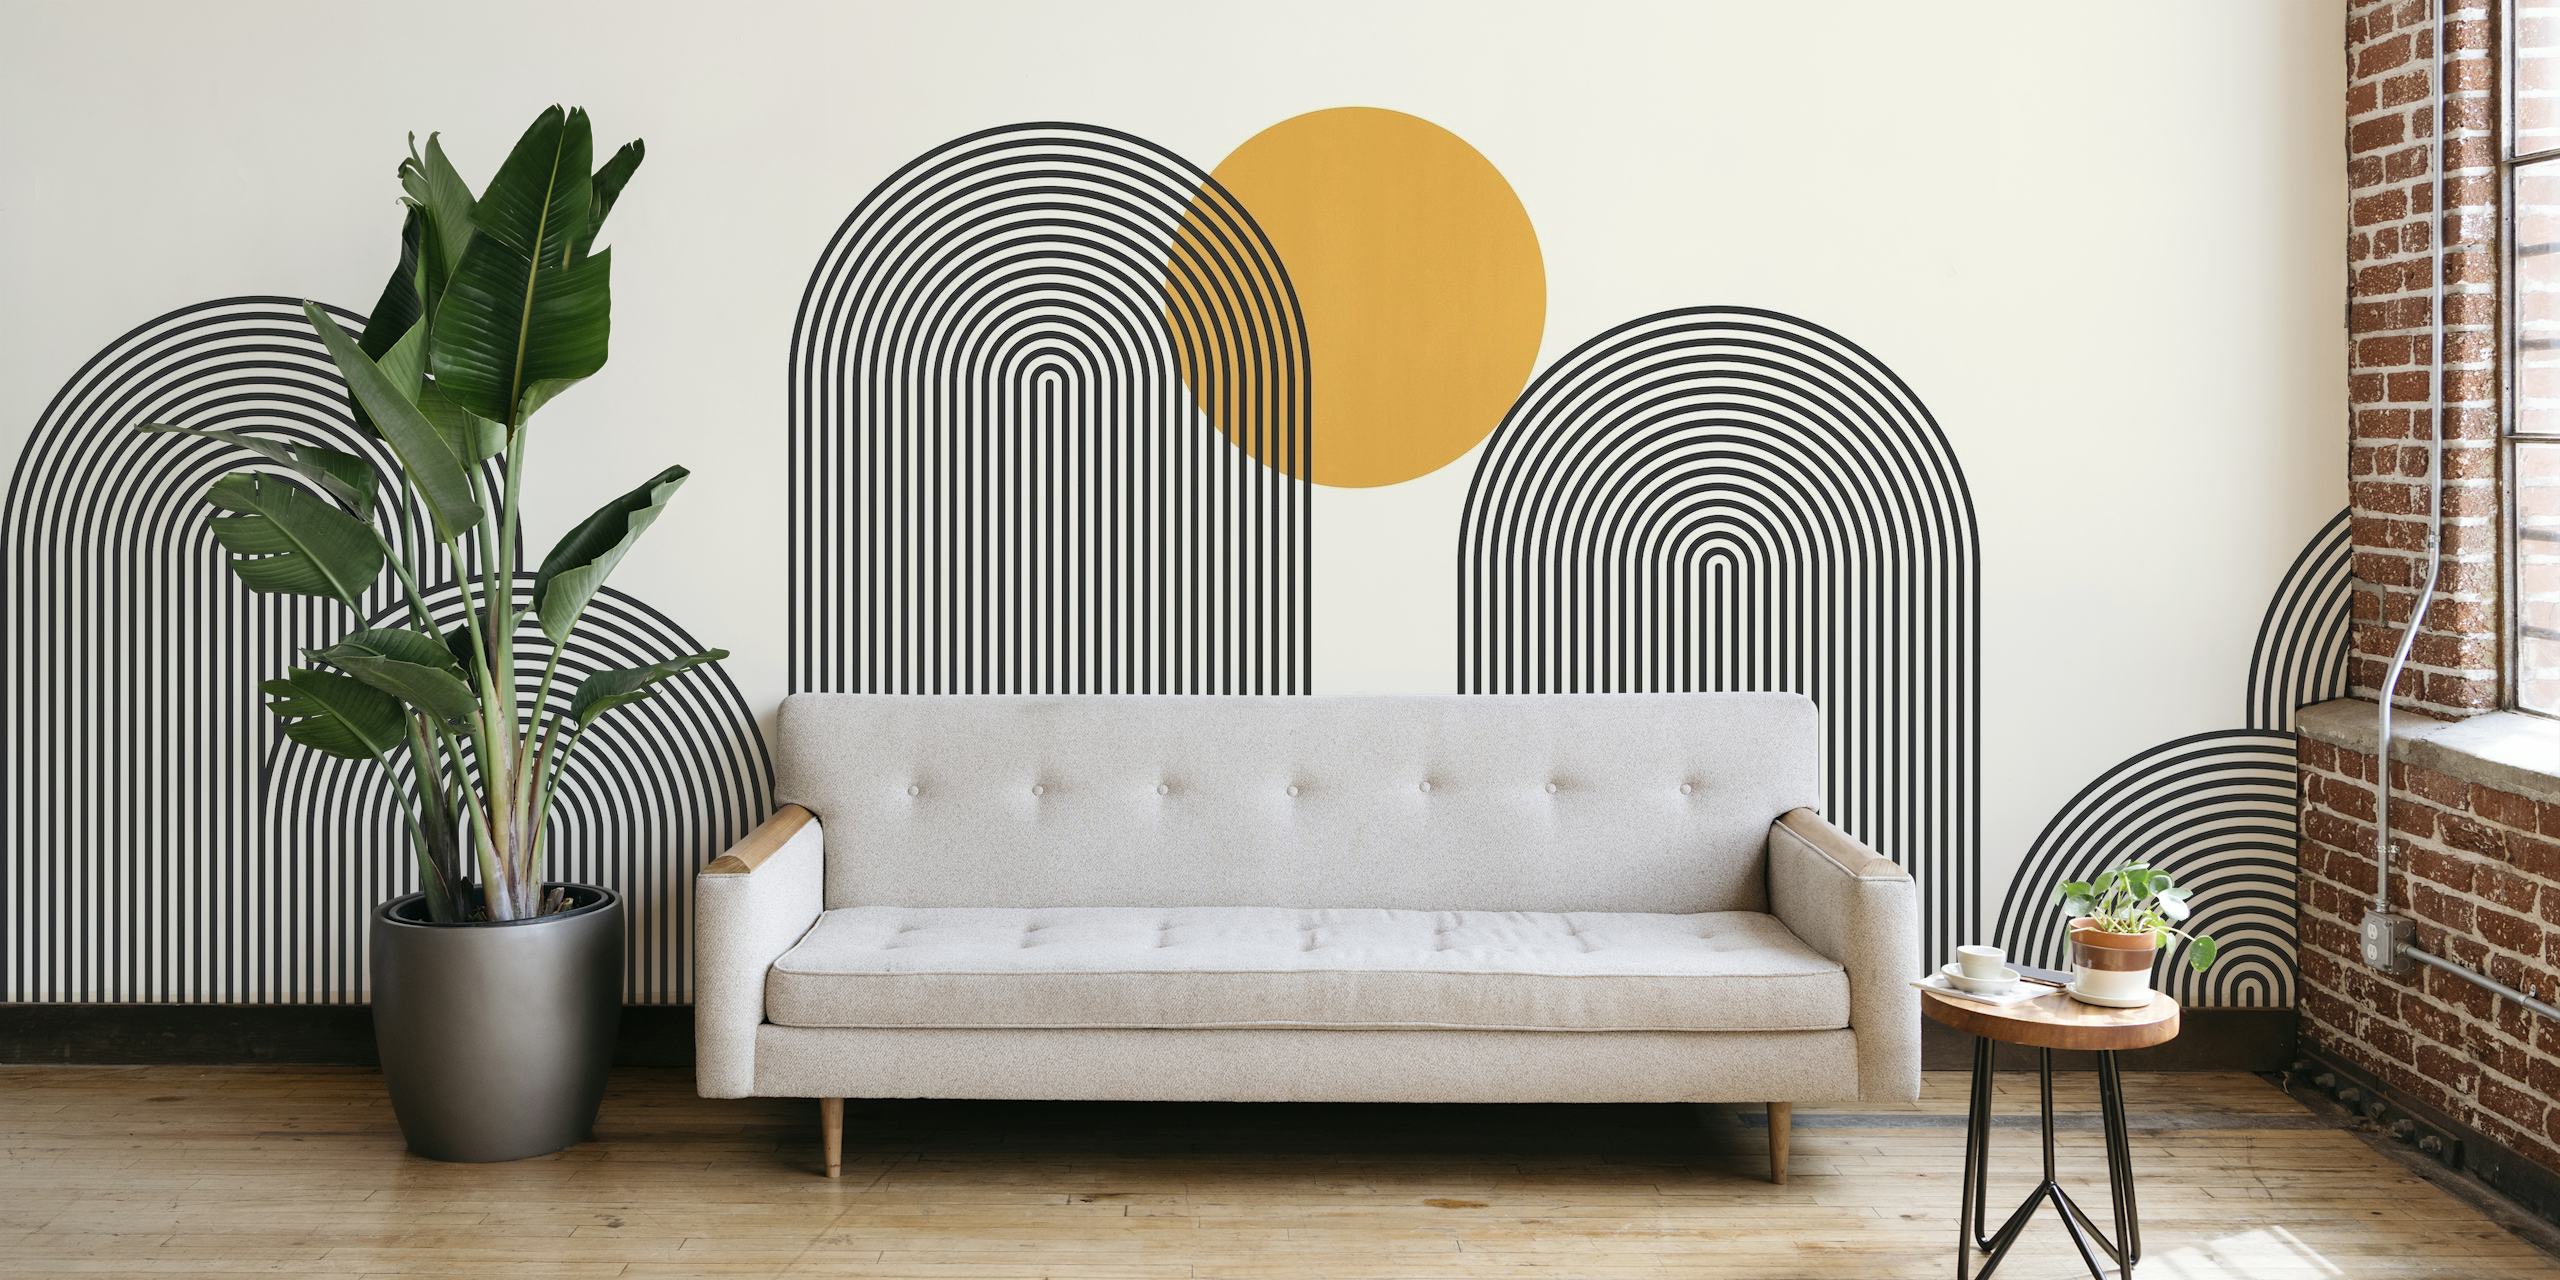 Abstract mountain range wall mural with geometric lines and circles in a pastel color scheme